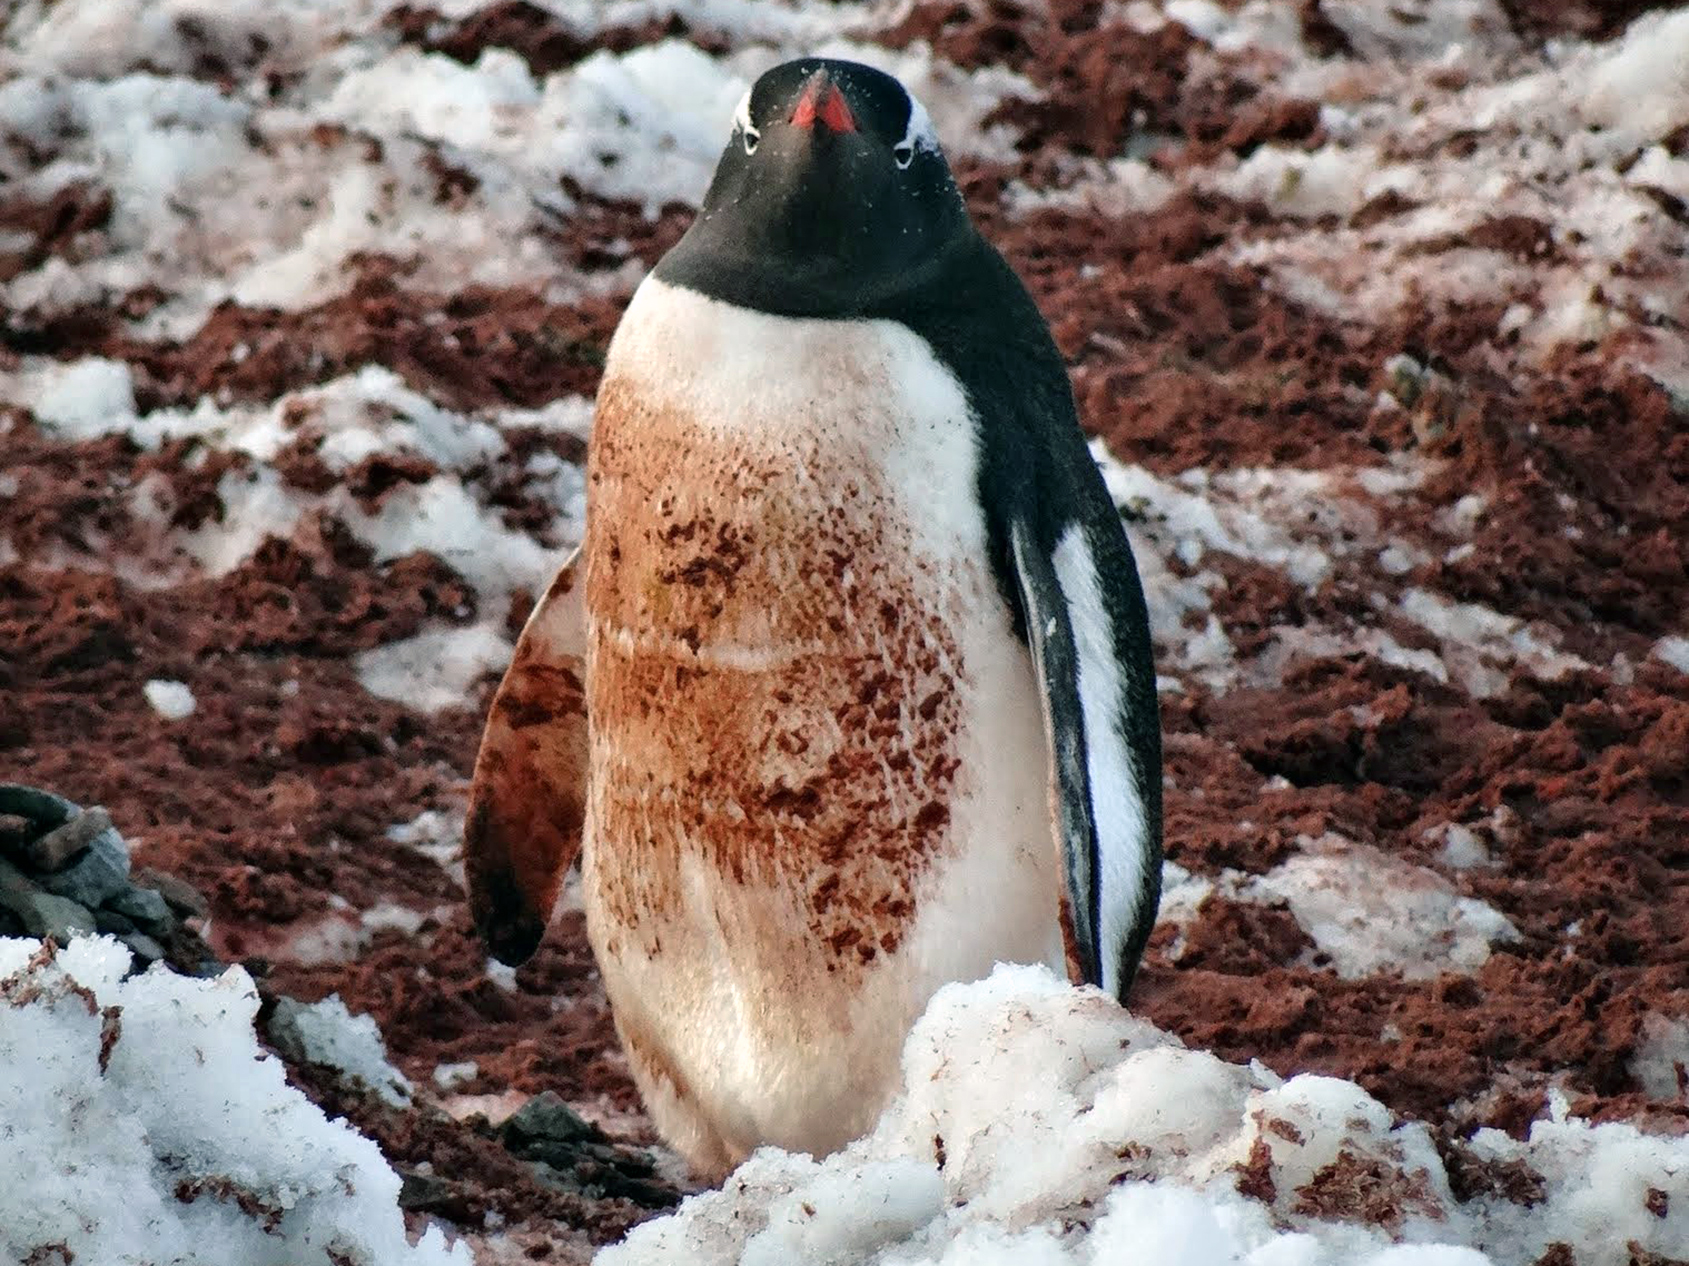 Krill is the major food source for many species in Antarctica, including gentoo penguins.  We witnessed many “red” penguins, such as this gentoo after feasting on krill.